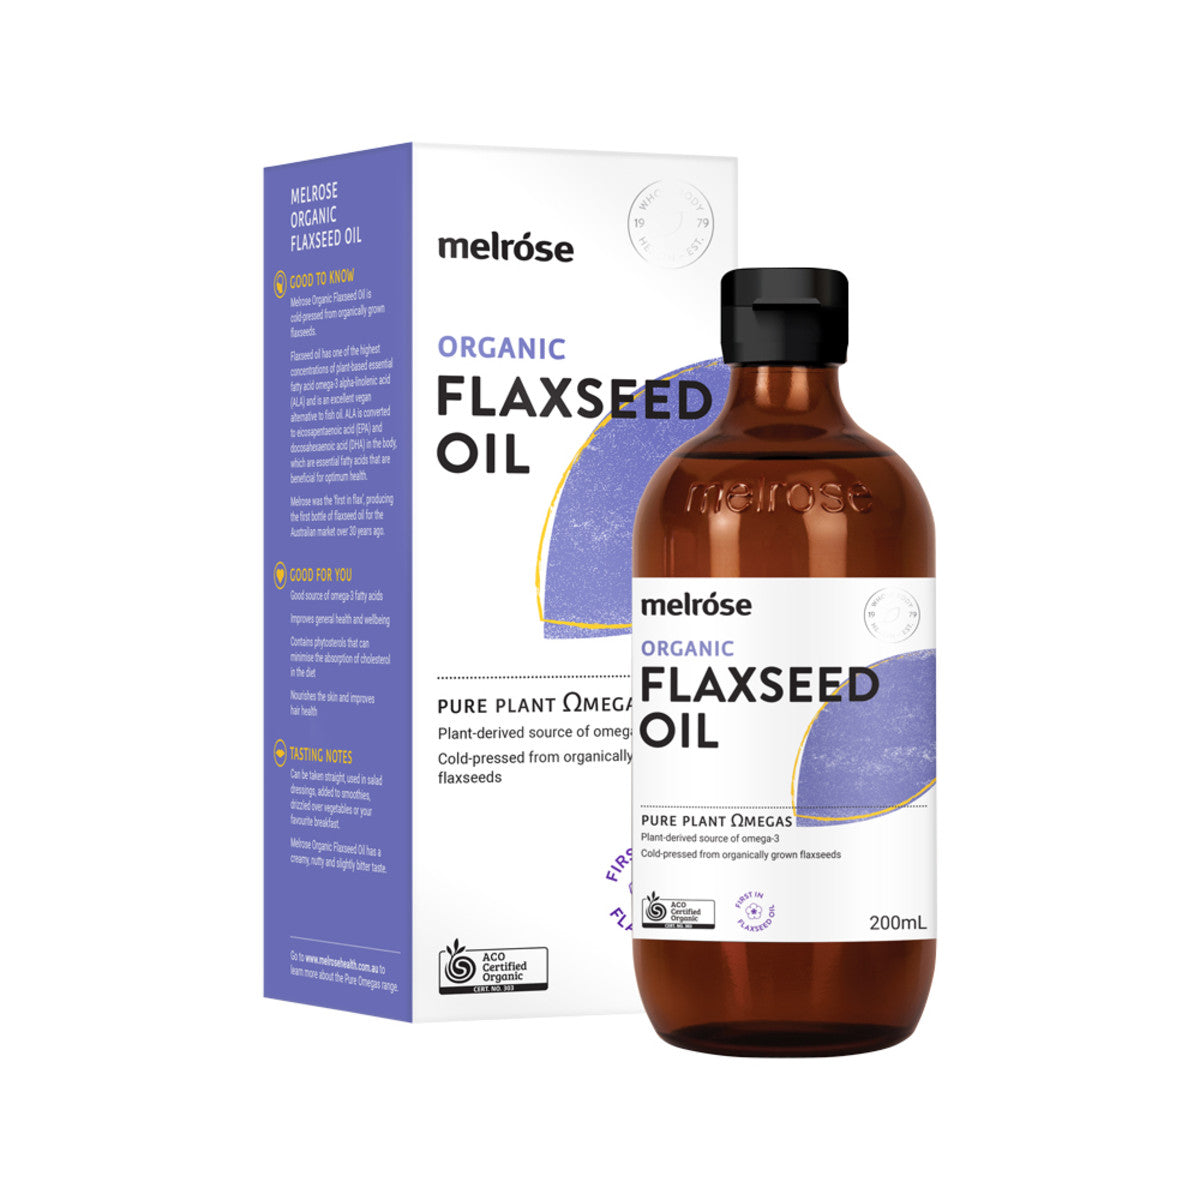 Melrose Organic Flaxseed Oil 200ml-The Living Co.